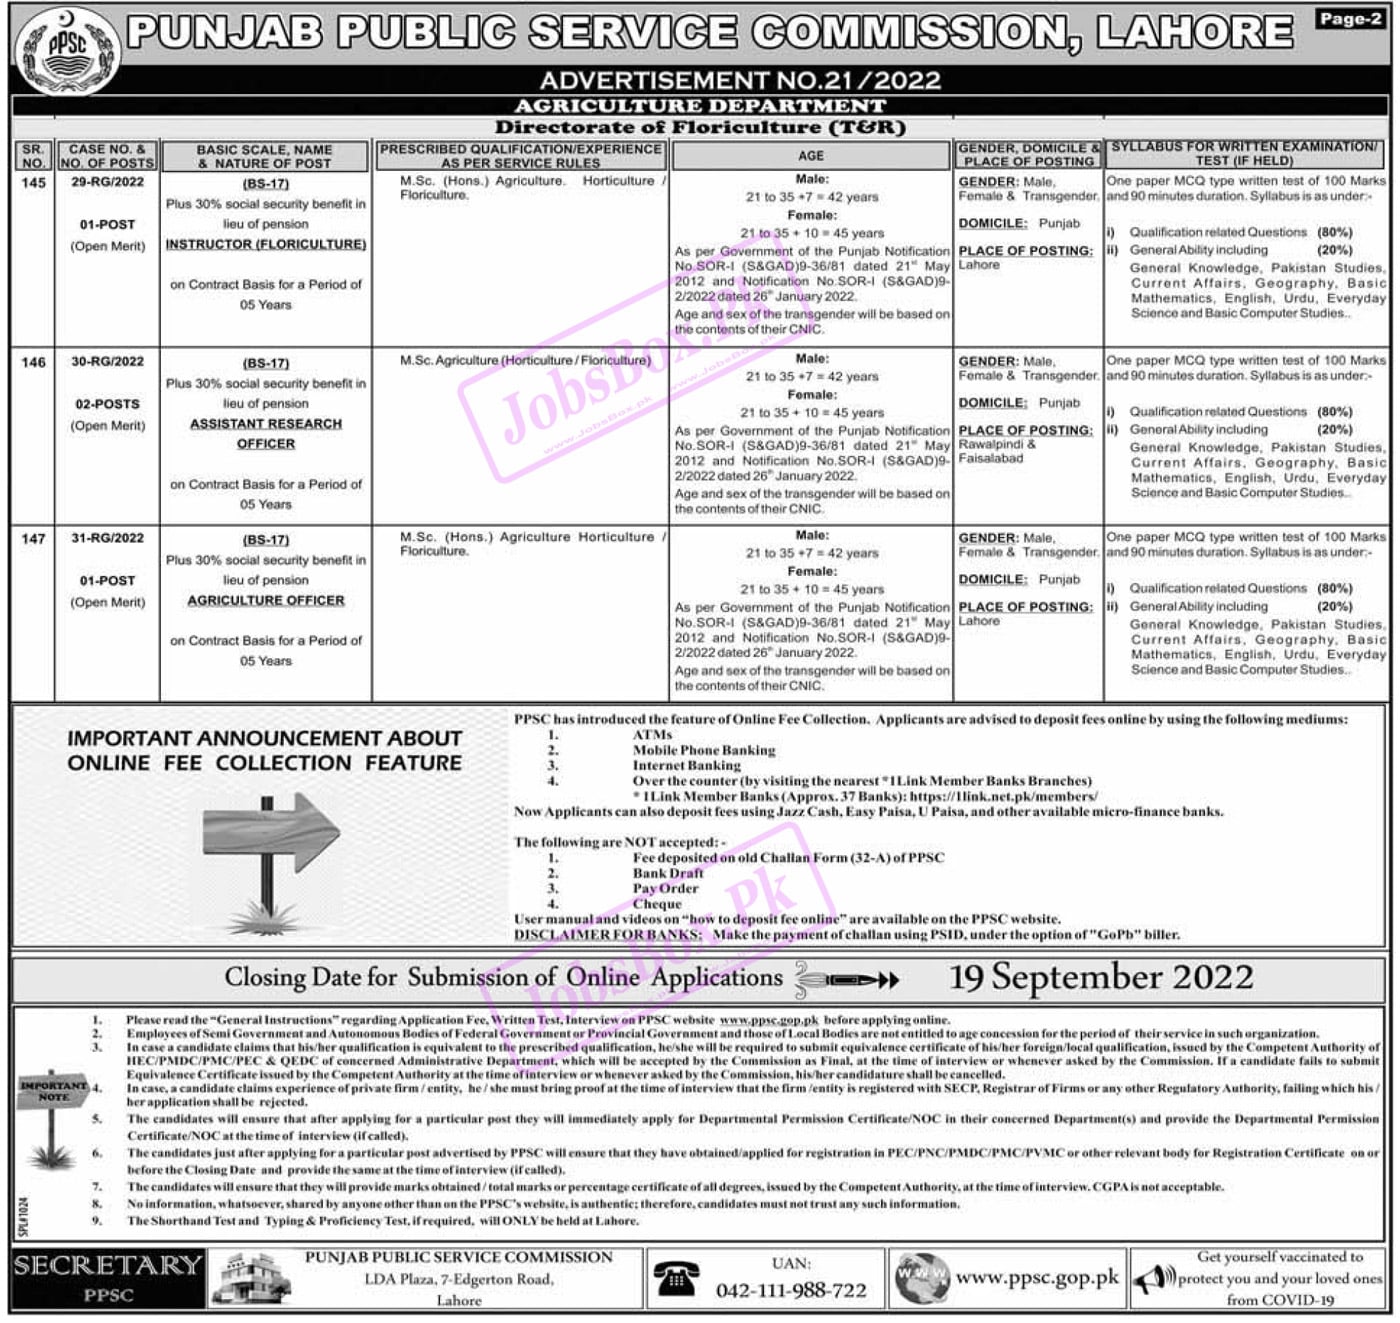 Latest PPSC Advertisement Number 21-2022